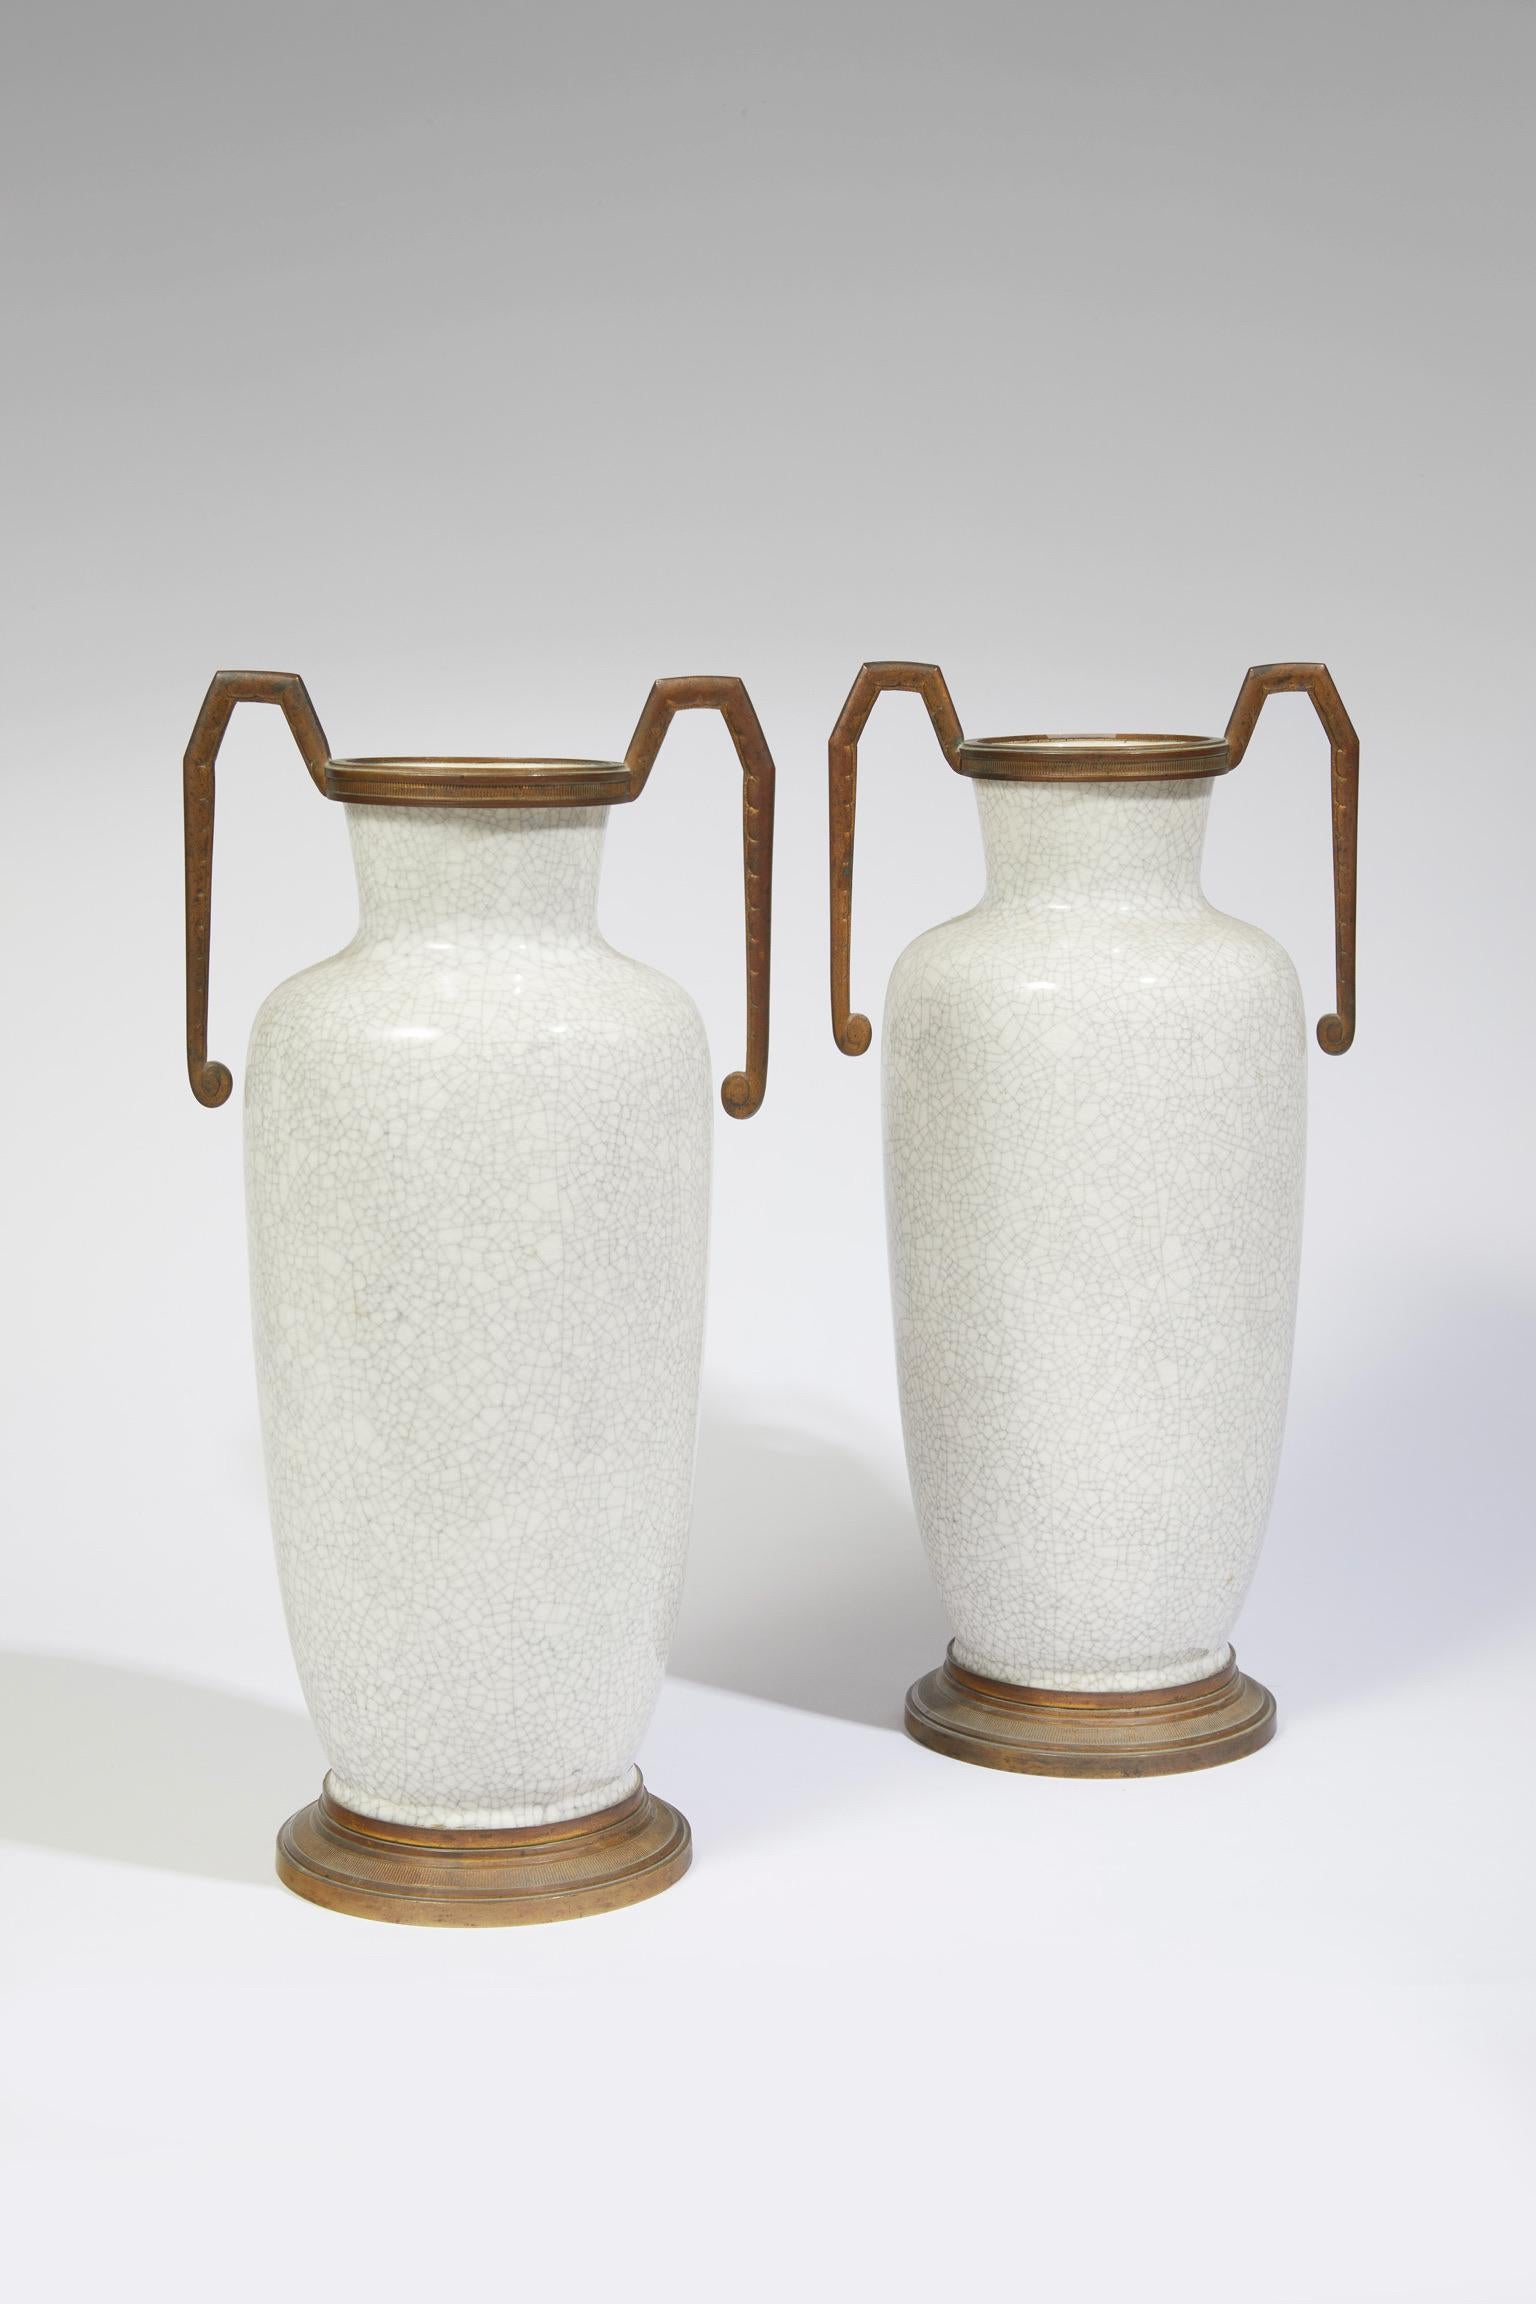 Pair of white cracked enameled porcelain amphorae vases with a patinated, bronze neck, handles and base.
Numbered 723, one signed and with a medallion with the monogram, LD, Made in France.